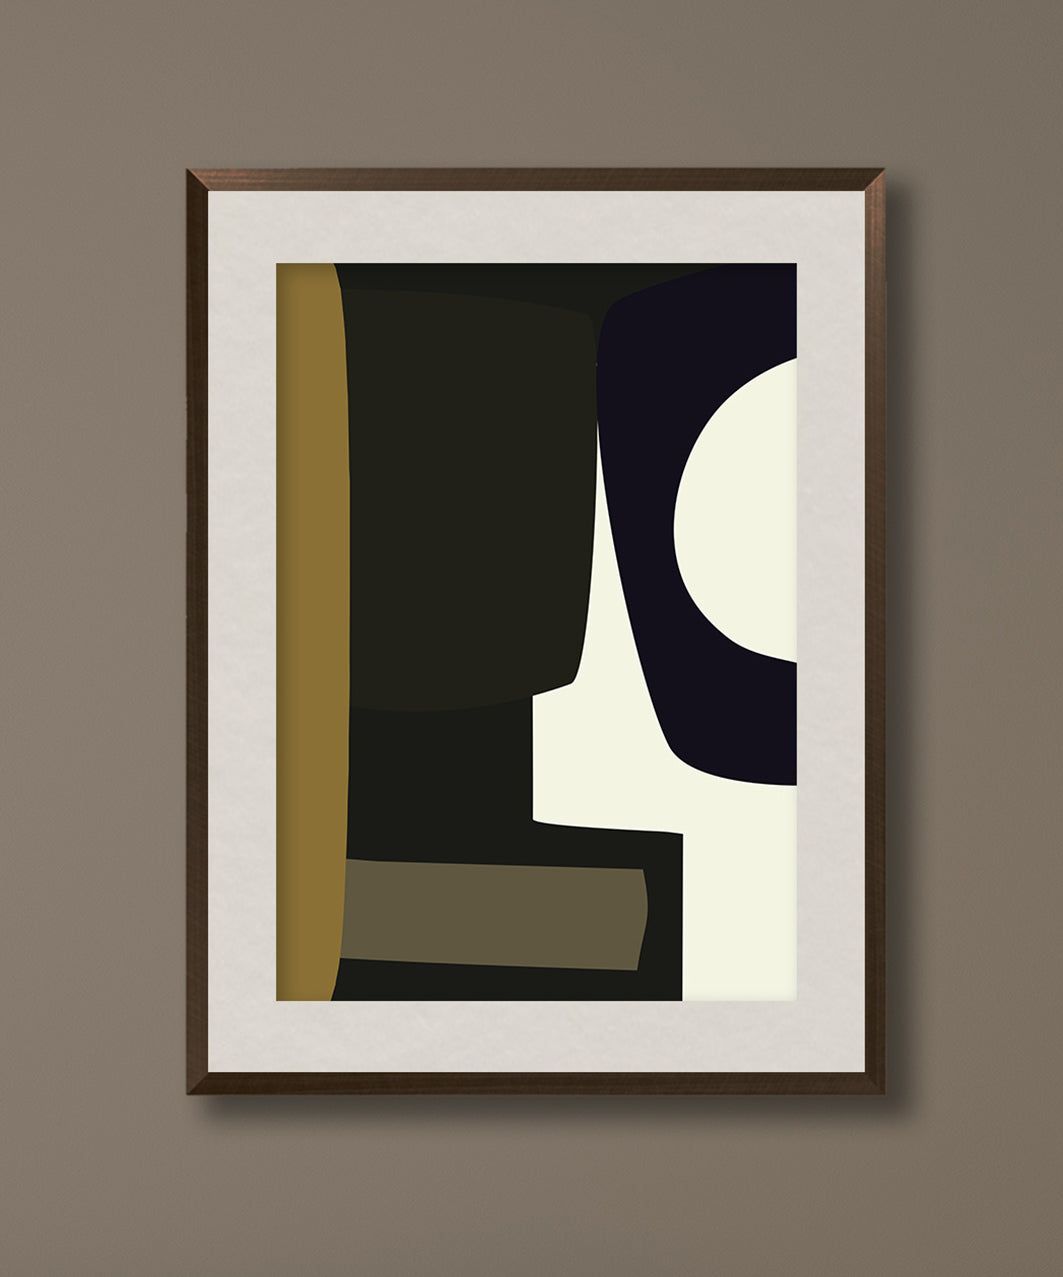 Faye, a Giclée print in several sizes. Design by Edith Beurskens